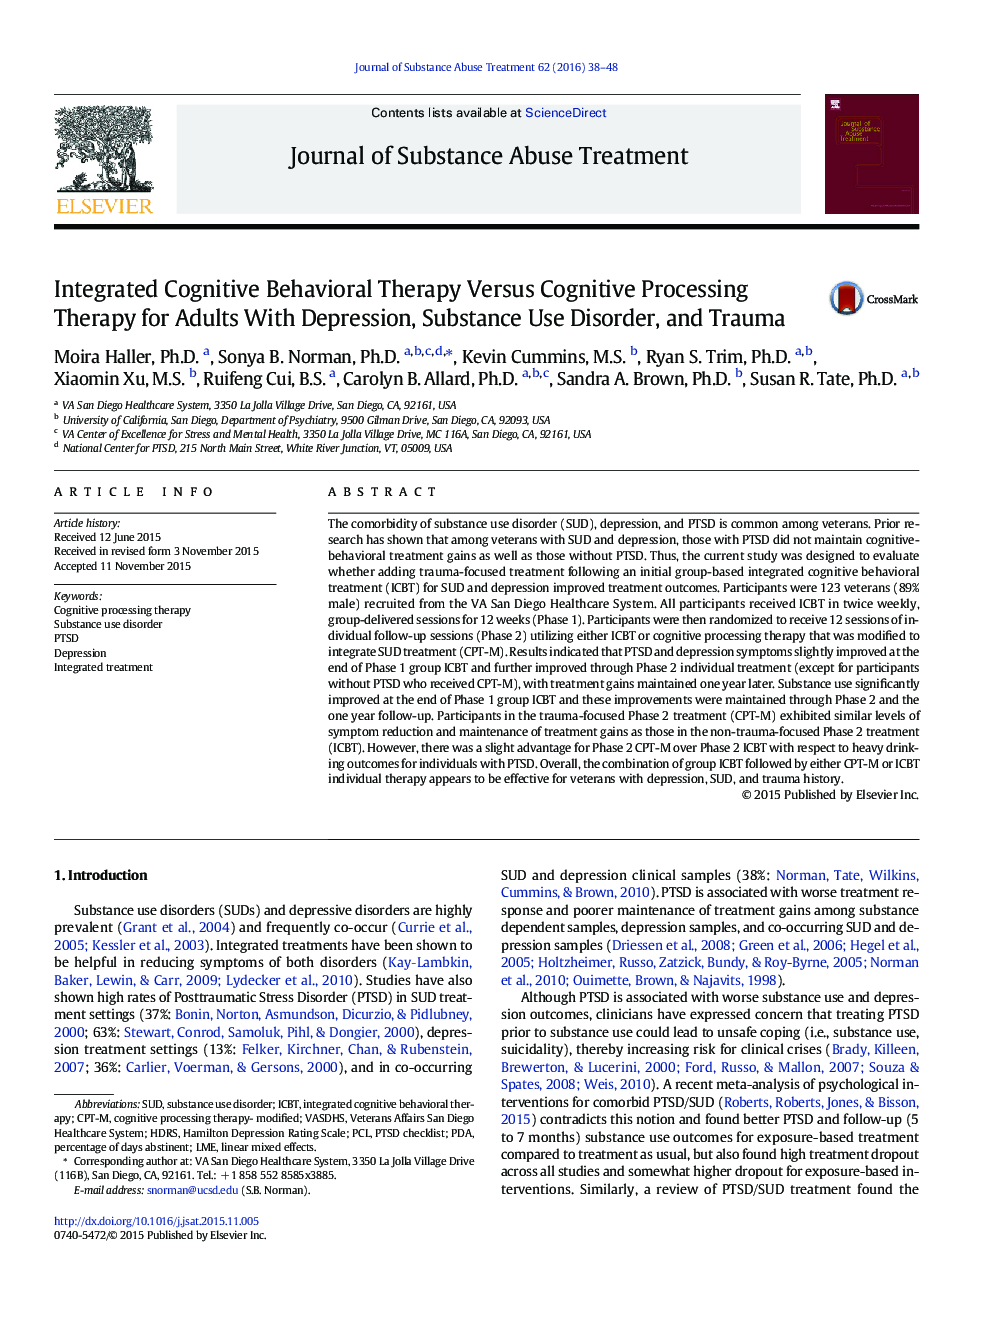 Integrated Cognitive Behavioral Therapy Versus Cognitive Processing Therapy for Adults With Depression, Substance Use Disorder, and Trauma